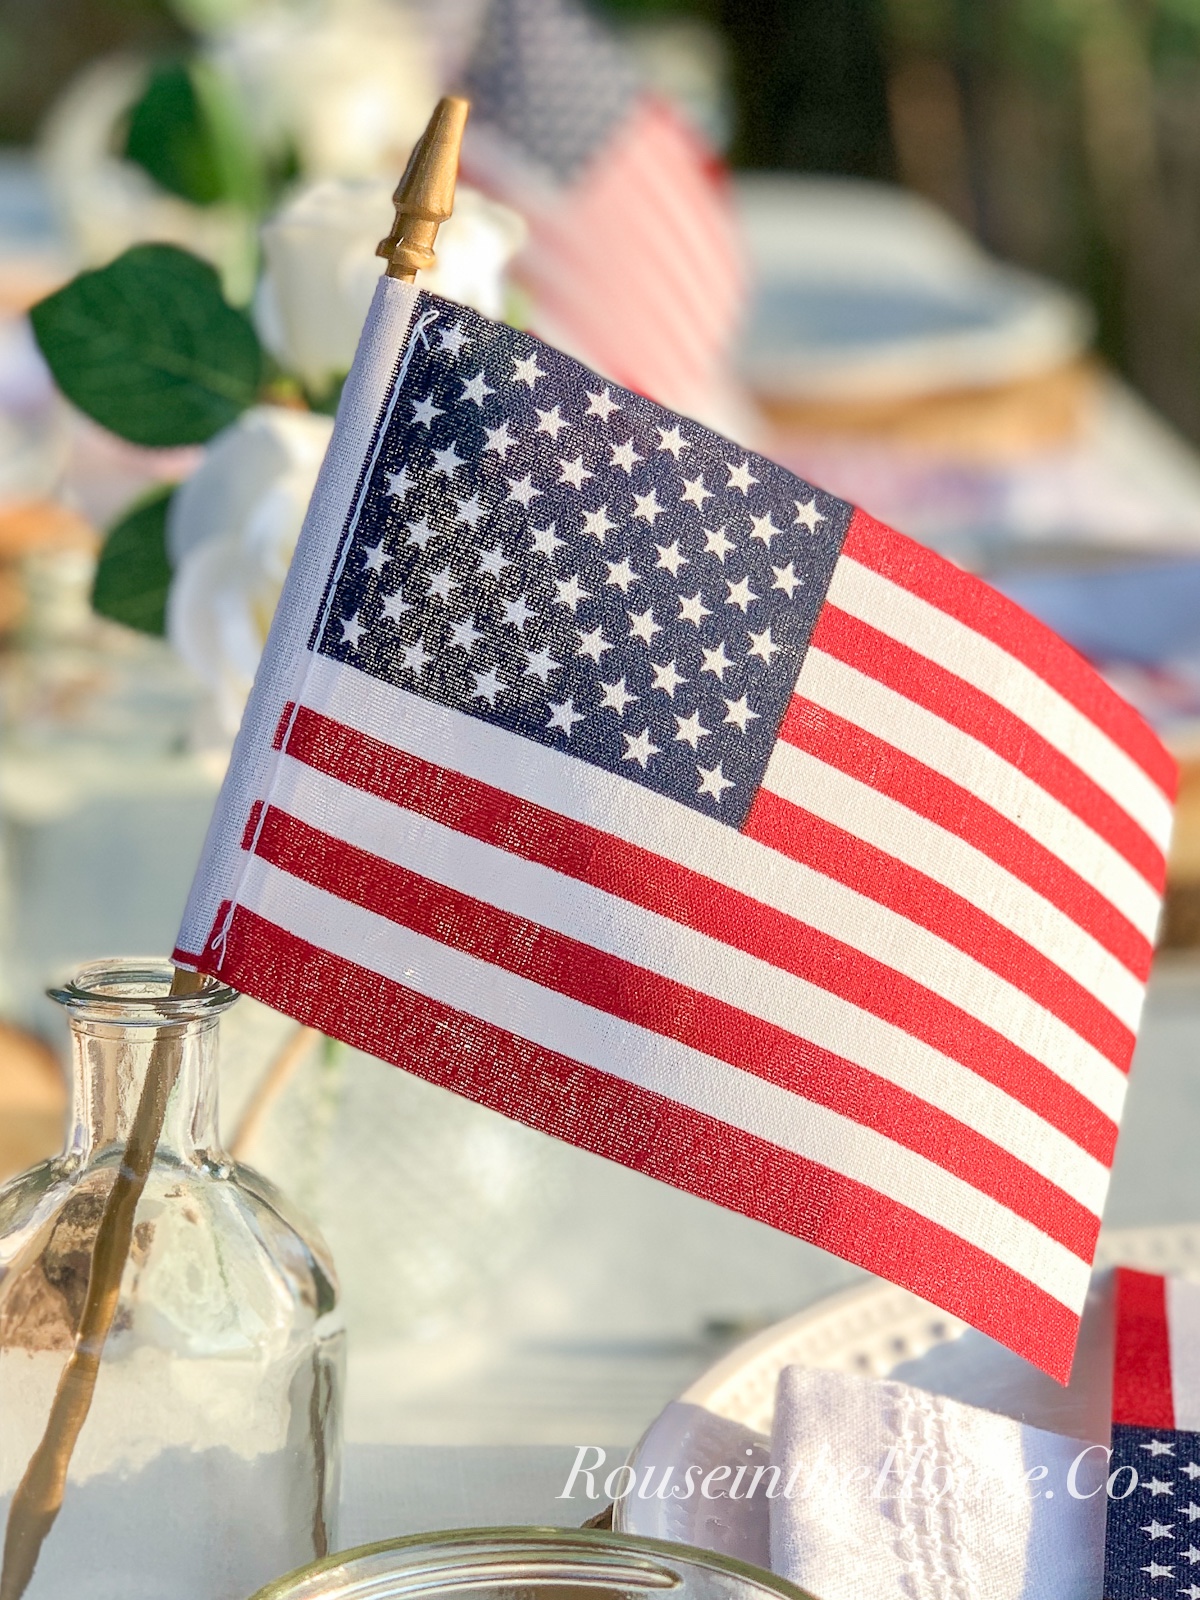 A small American flag is used as table decor on a July 4th tablescape.